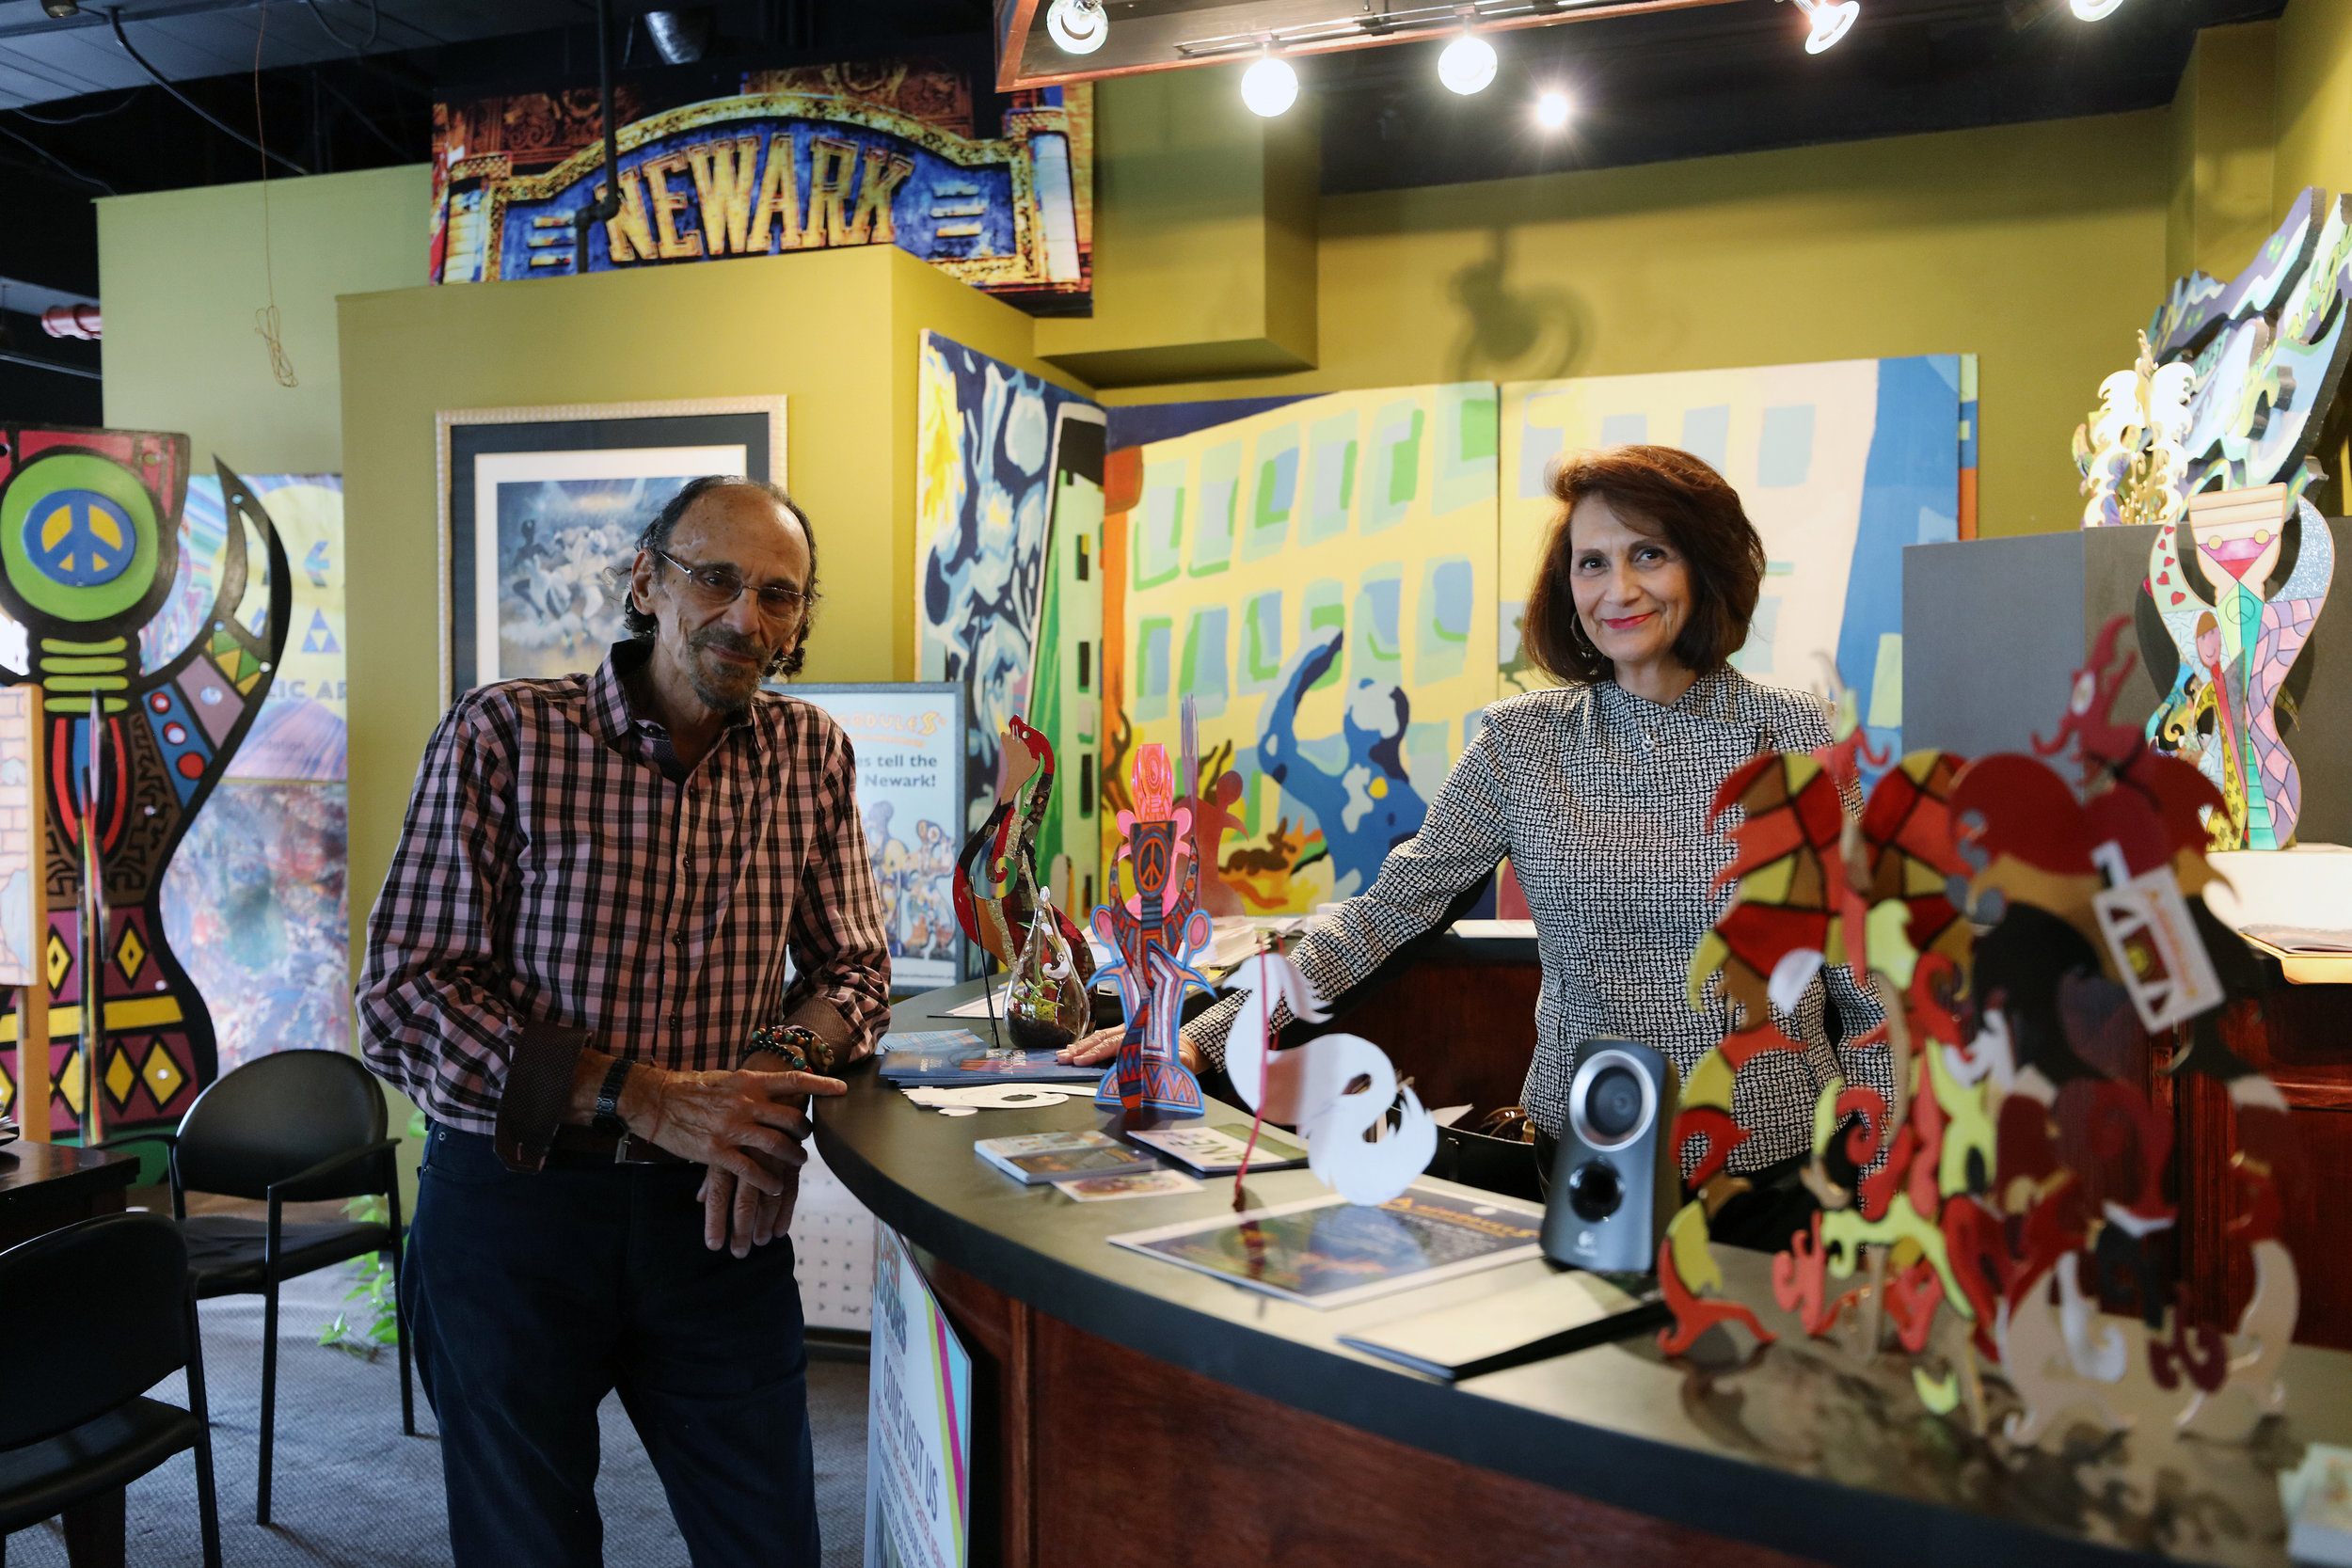 Chandri and Gary Barat in the BF Creation Nation Headquarters at One Gateway Center surrounded by Animodules™ and local youth artworks | Photo Credit: Anthony Alvarez